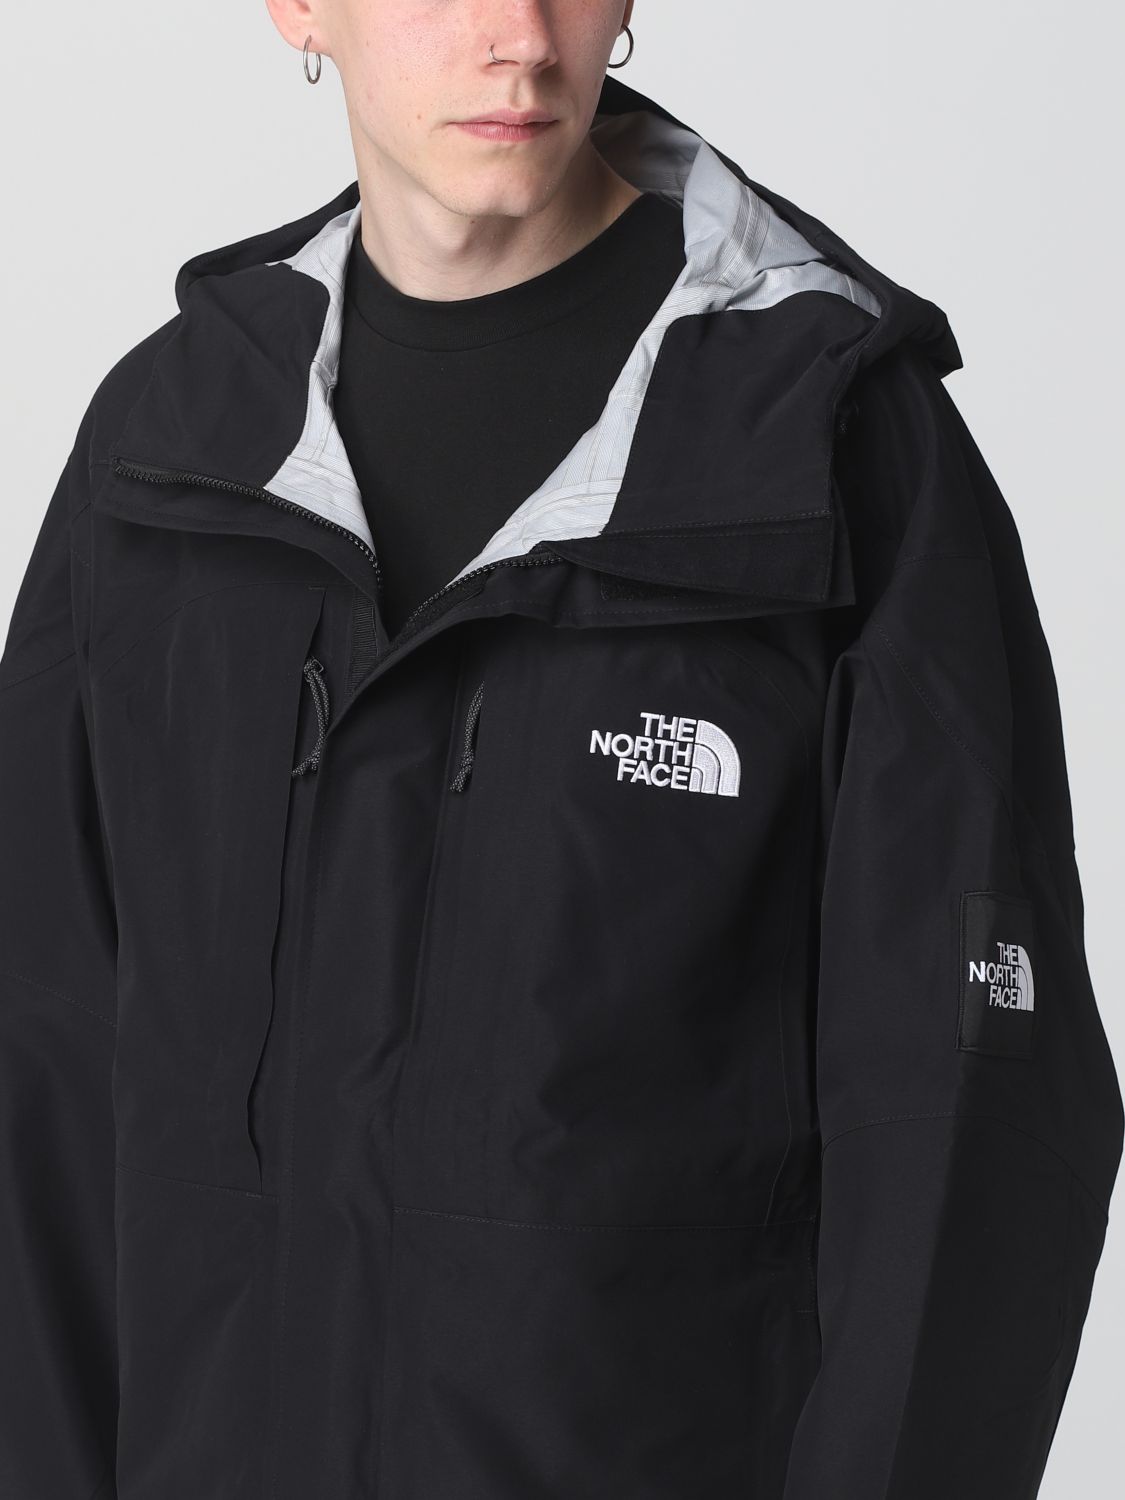 Giacca The North Face: Giacca Carduelis Dryvent™ 3L The North Face in tessuto sintetico nero 5